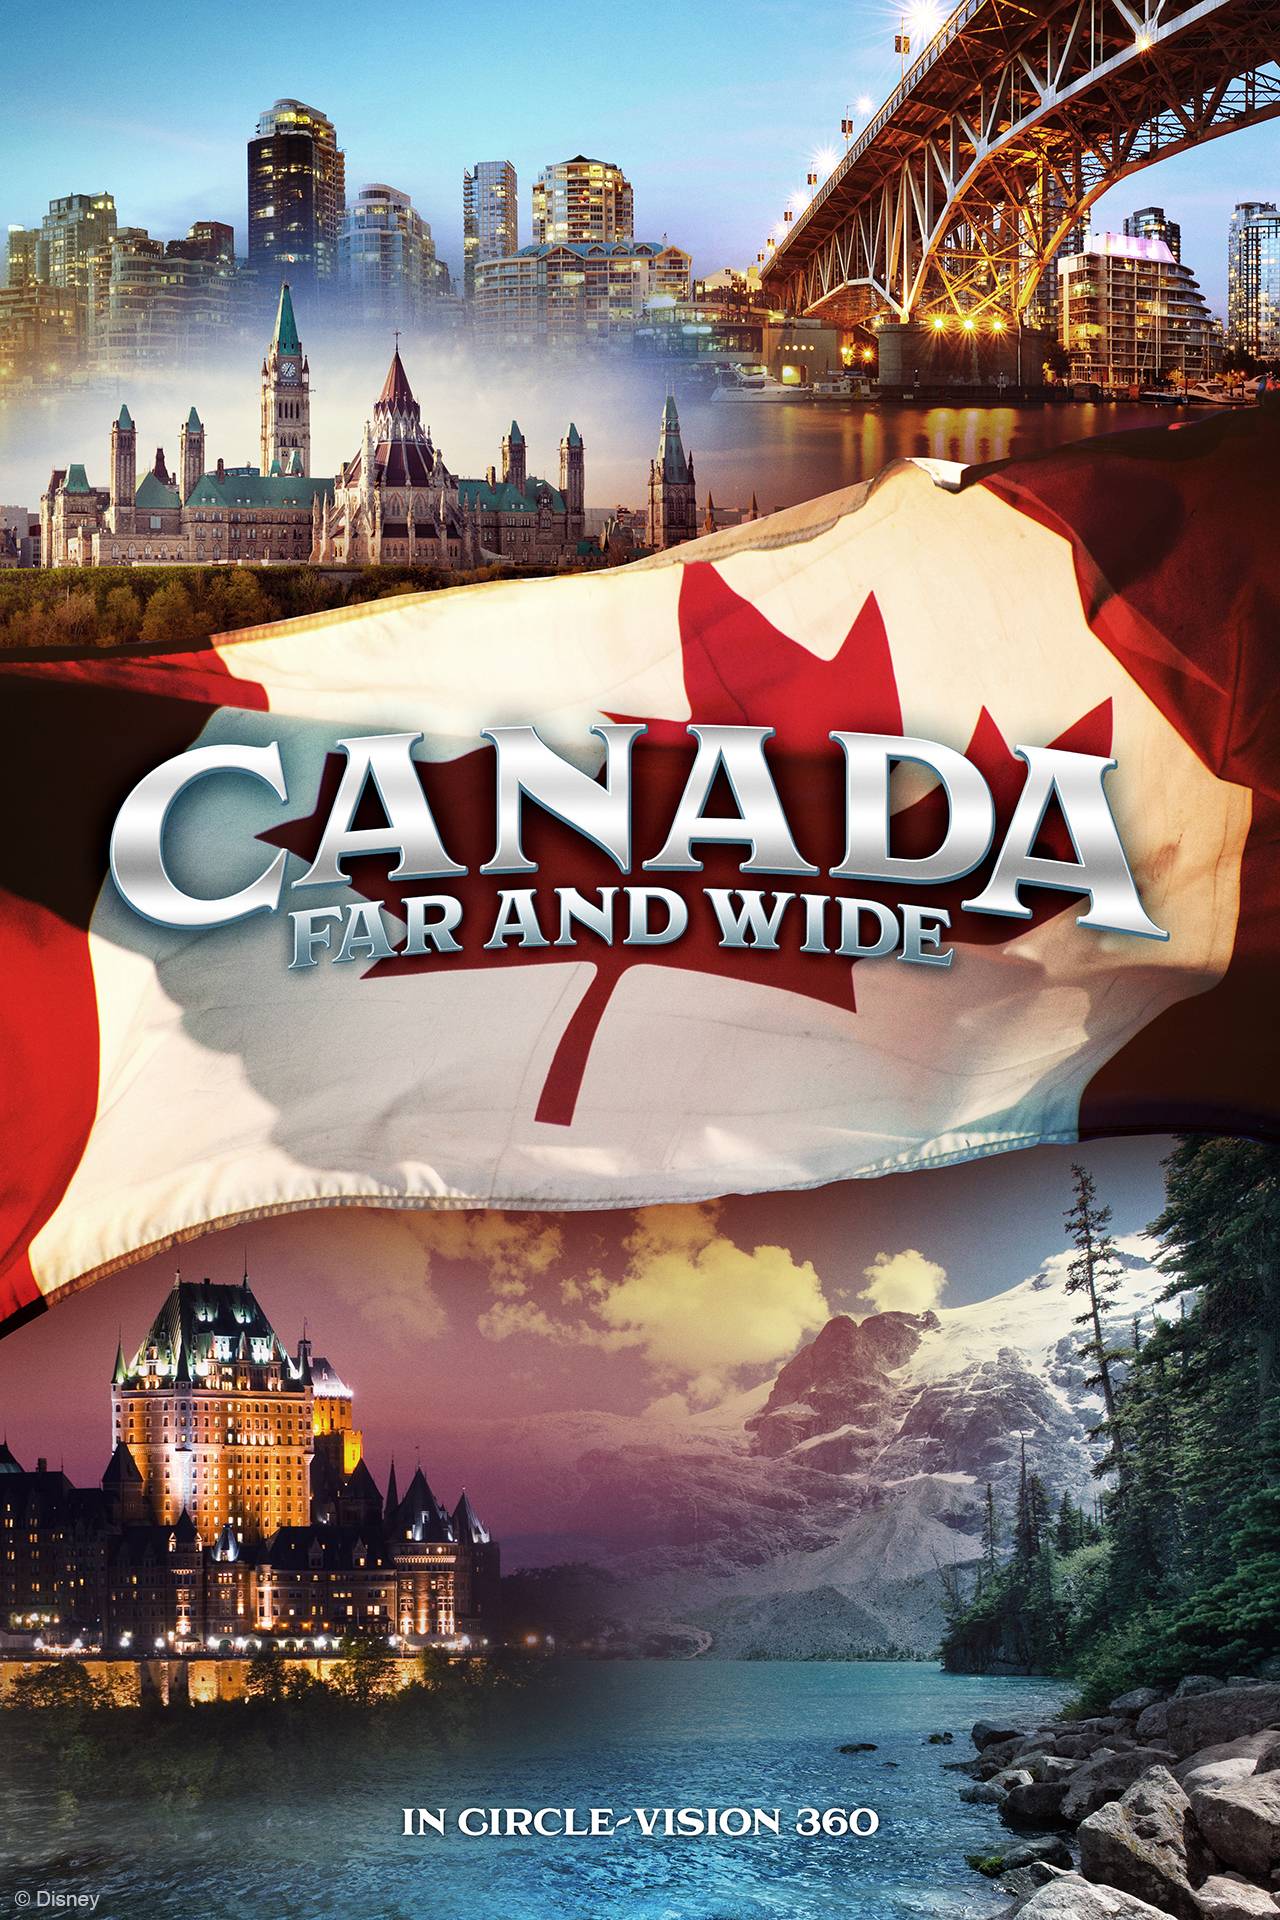 Canada Far and Wide Circle-Vision movie to open in January 2020